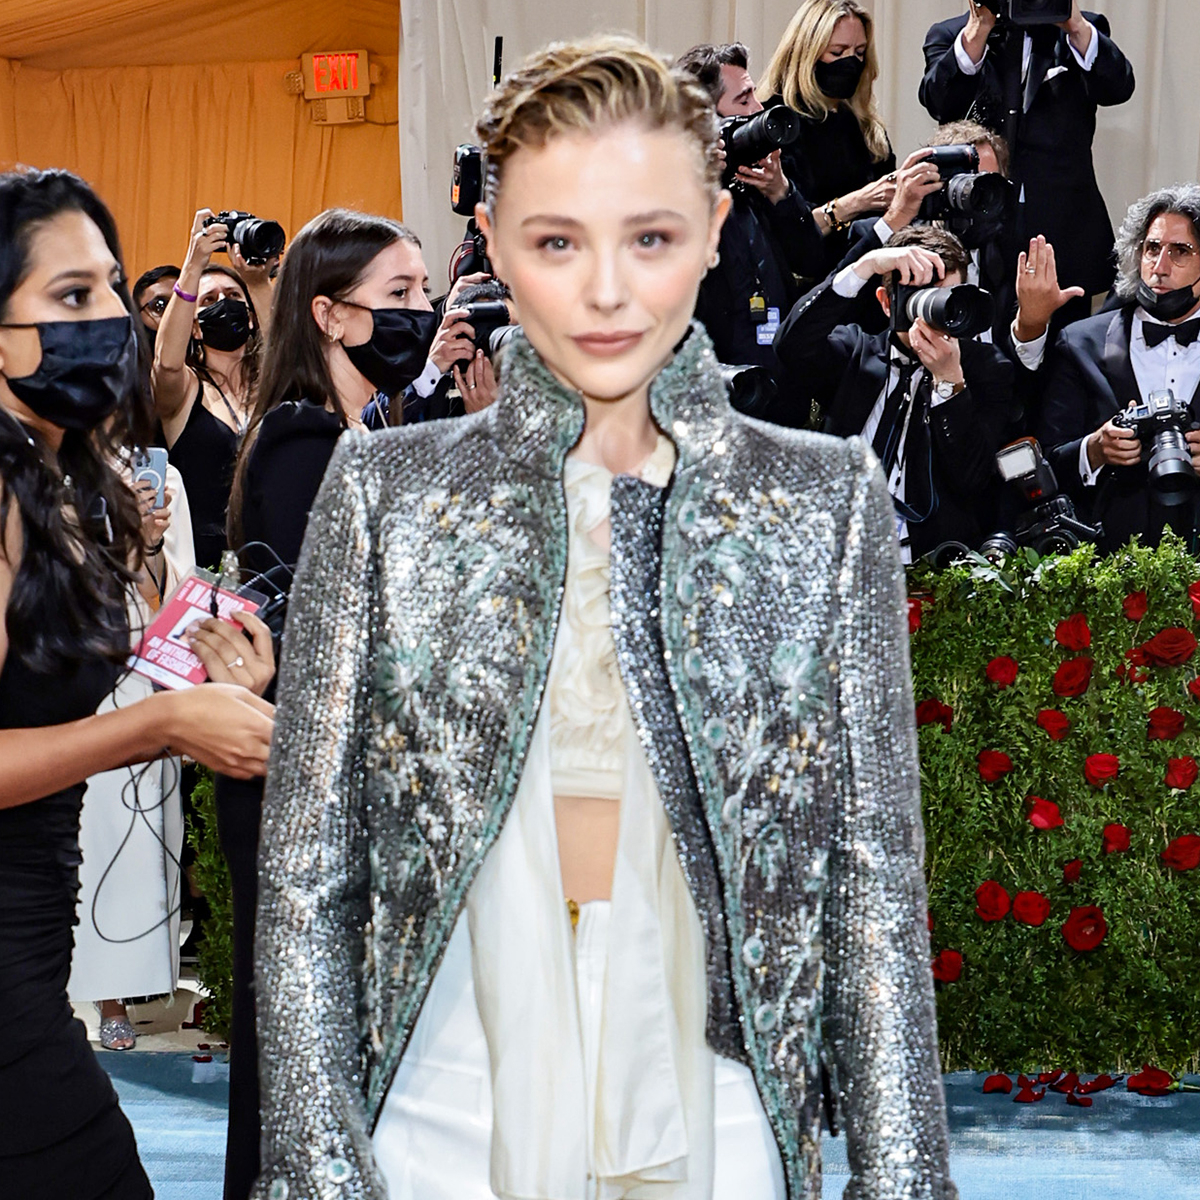 How did Chloe Grace Moretz cope with the paparazzi harassment she faced as  a child star? - Quora